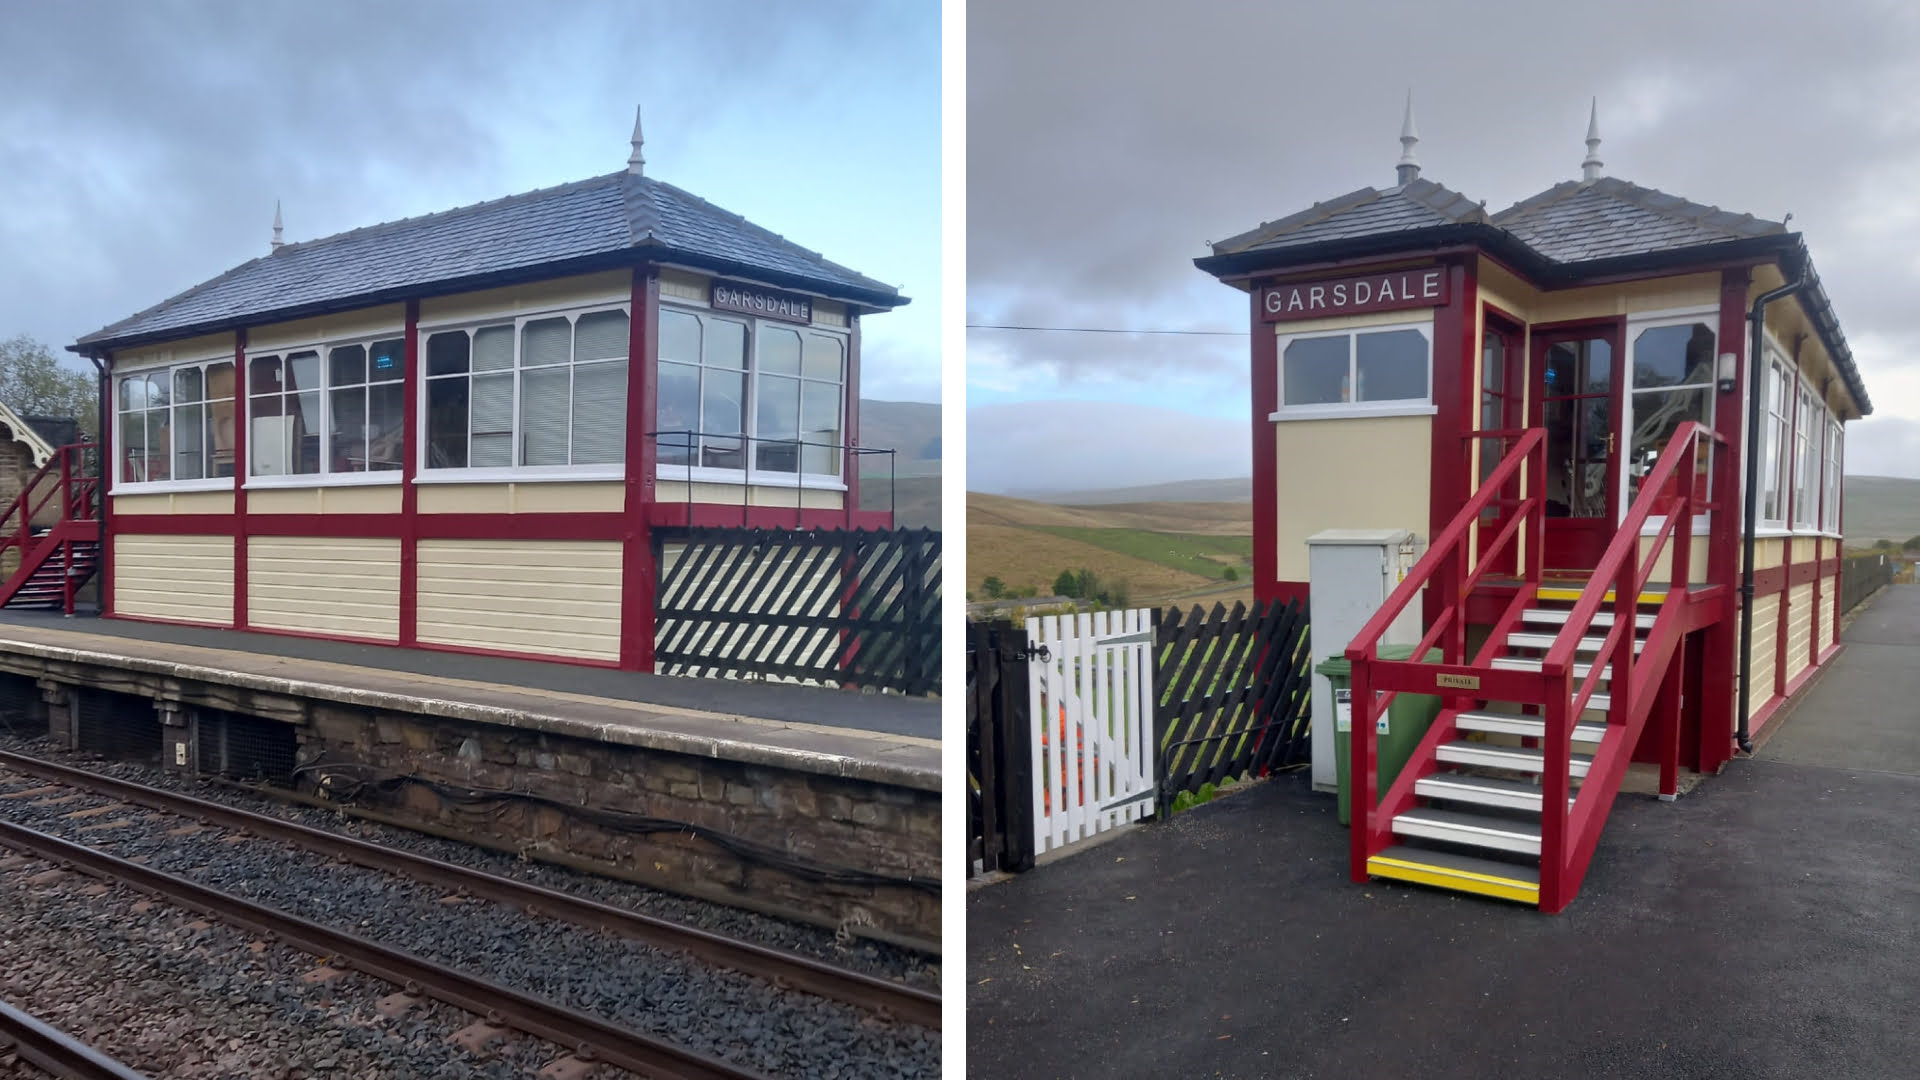 The Last Merseyrail Signal Boxes and their Heritage - Part 2 The